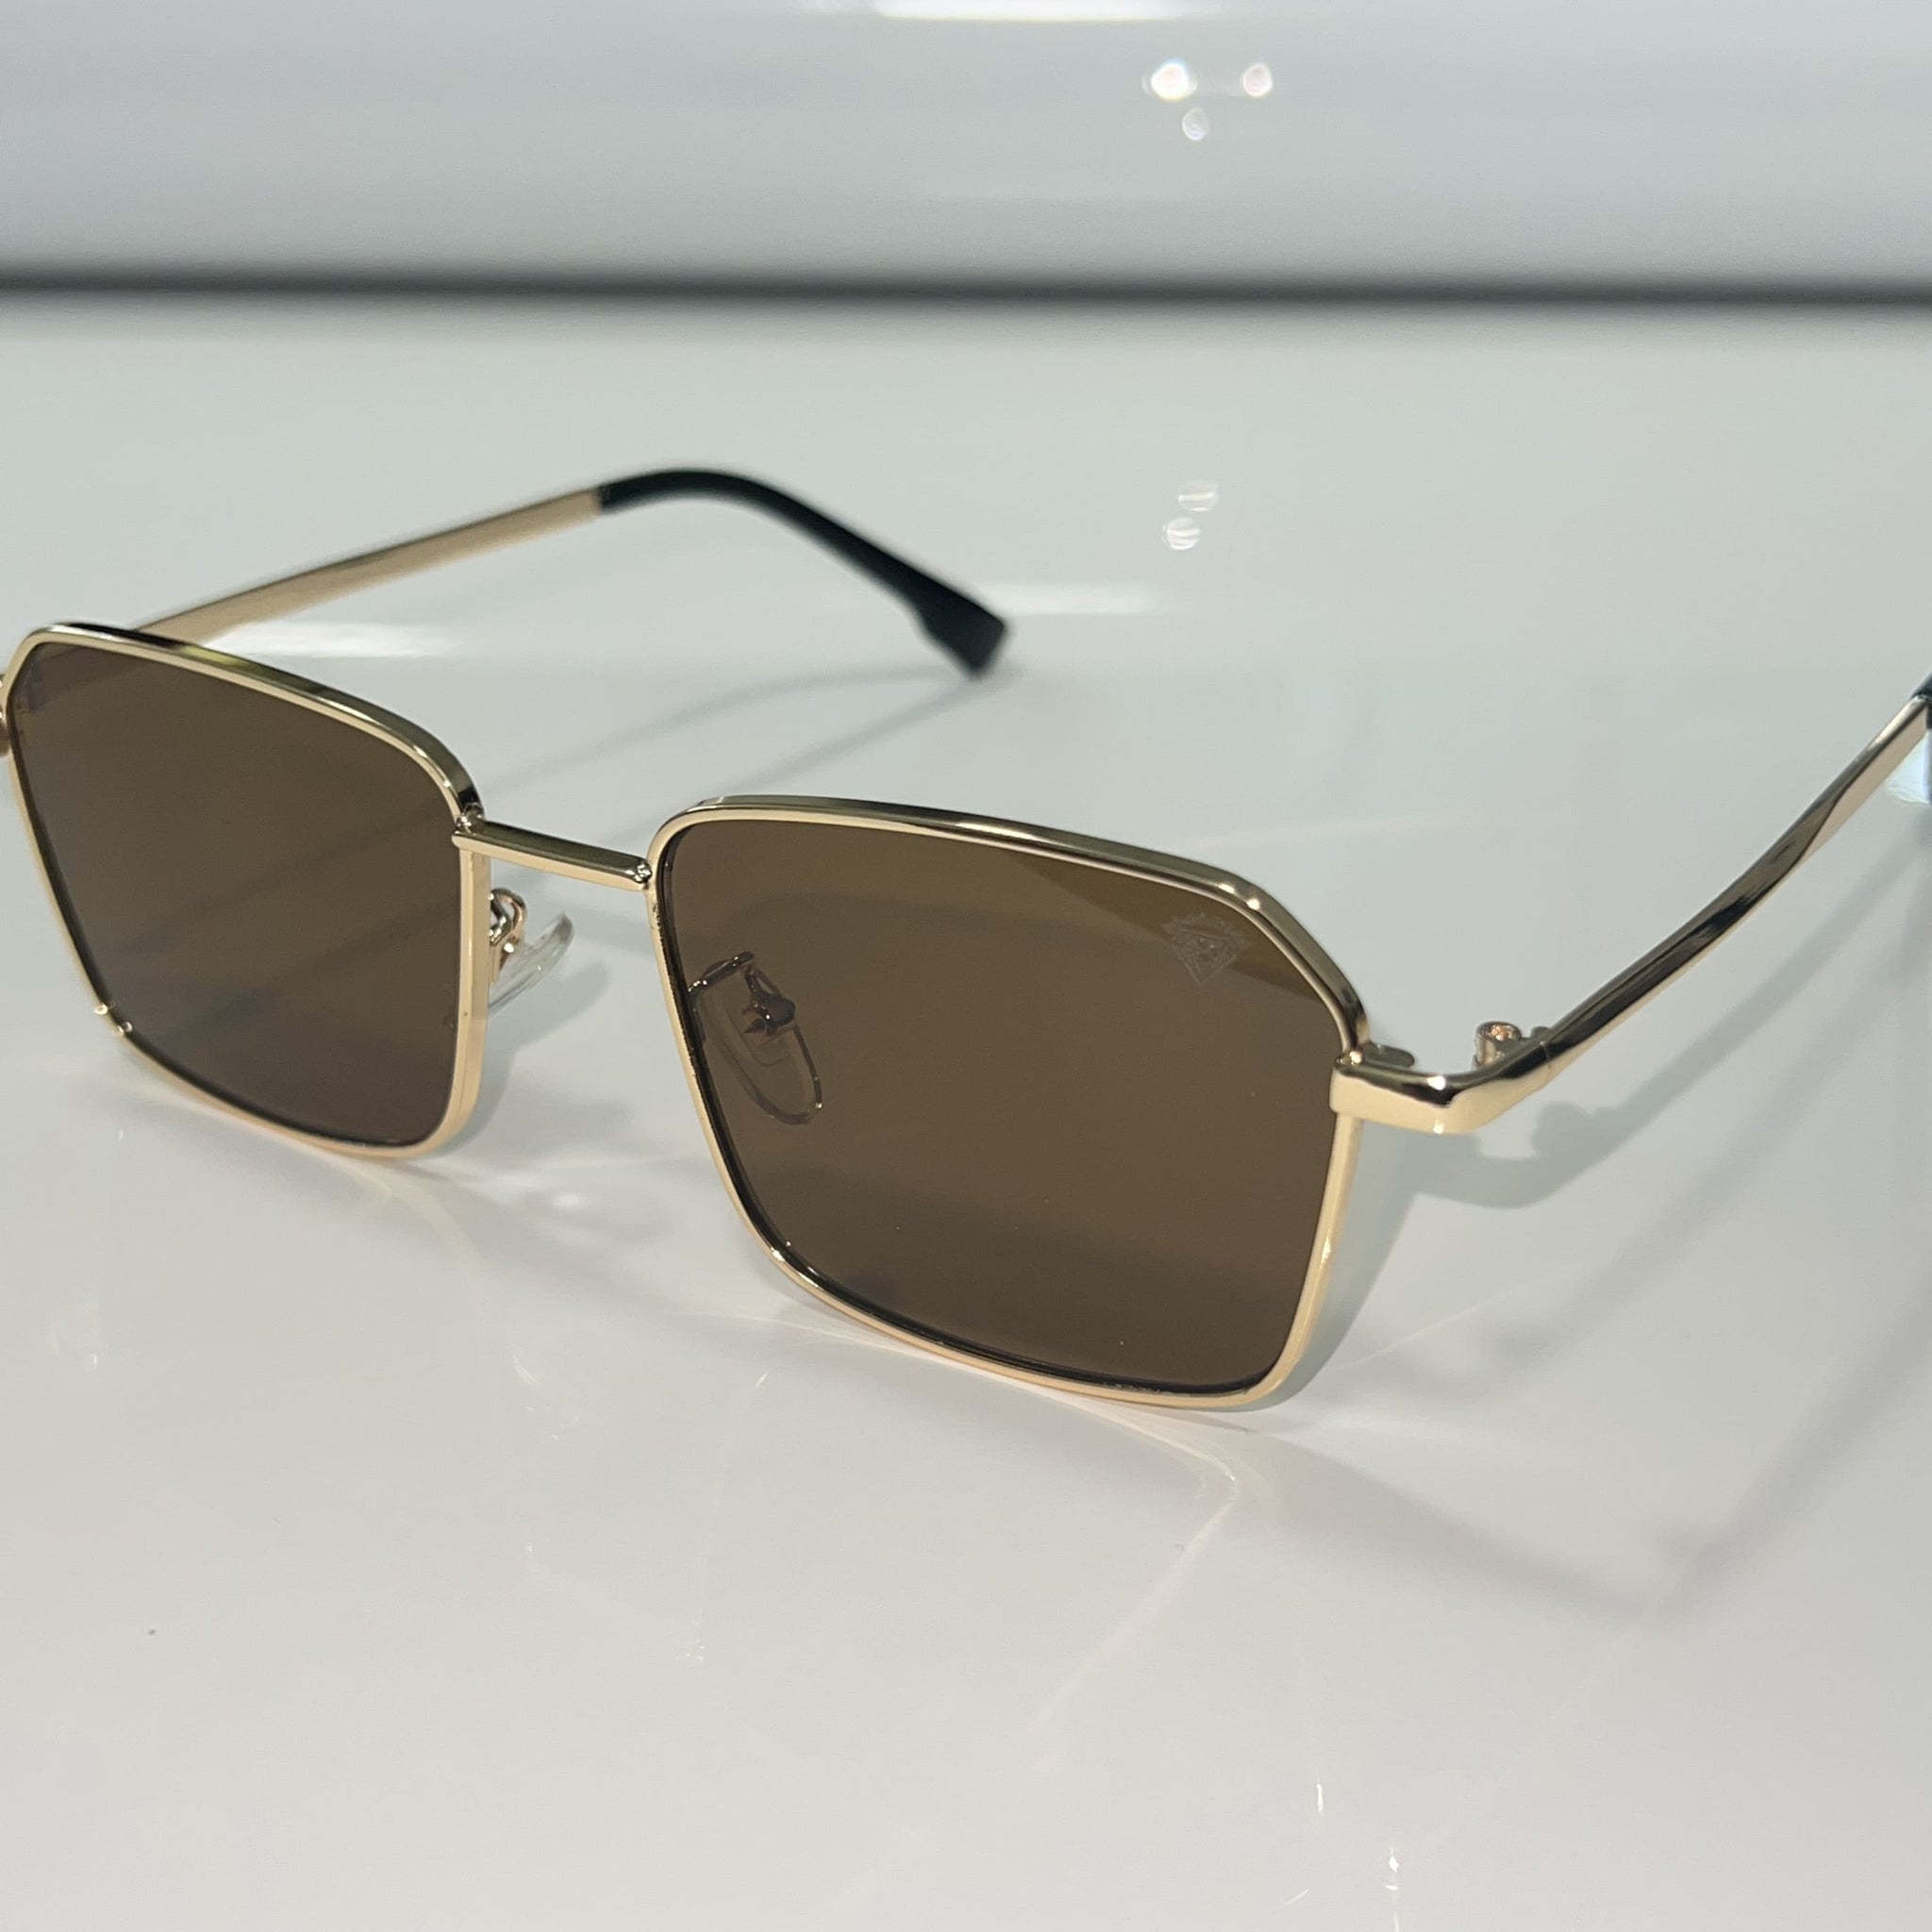 Celebrity Glasses - 14k gold plated - Sehgal Glasses - Brown Shade